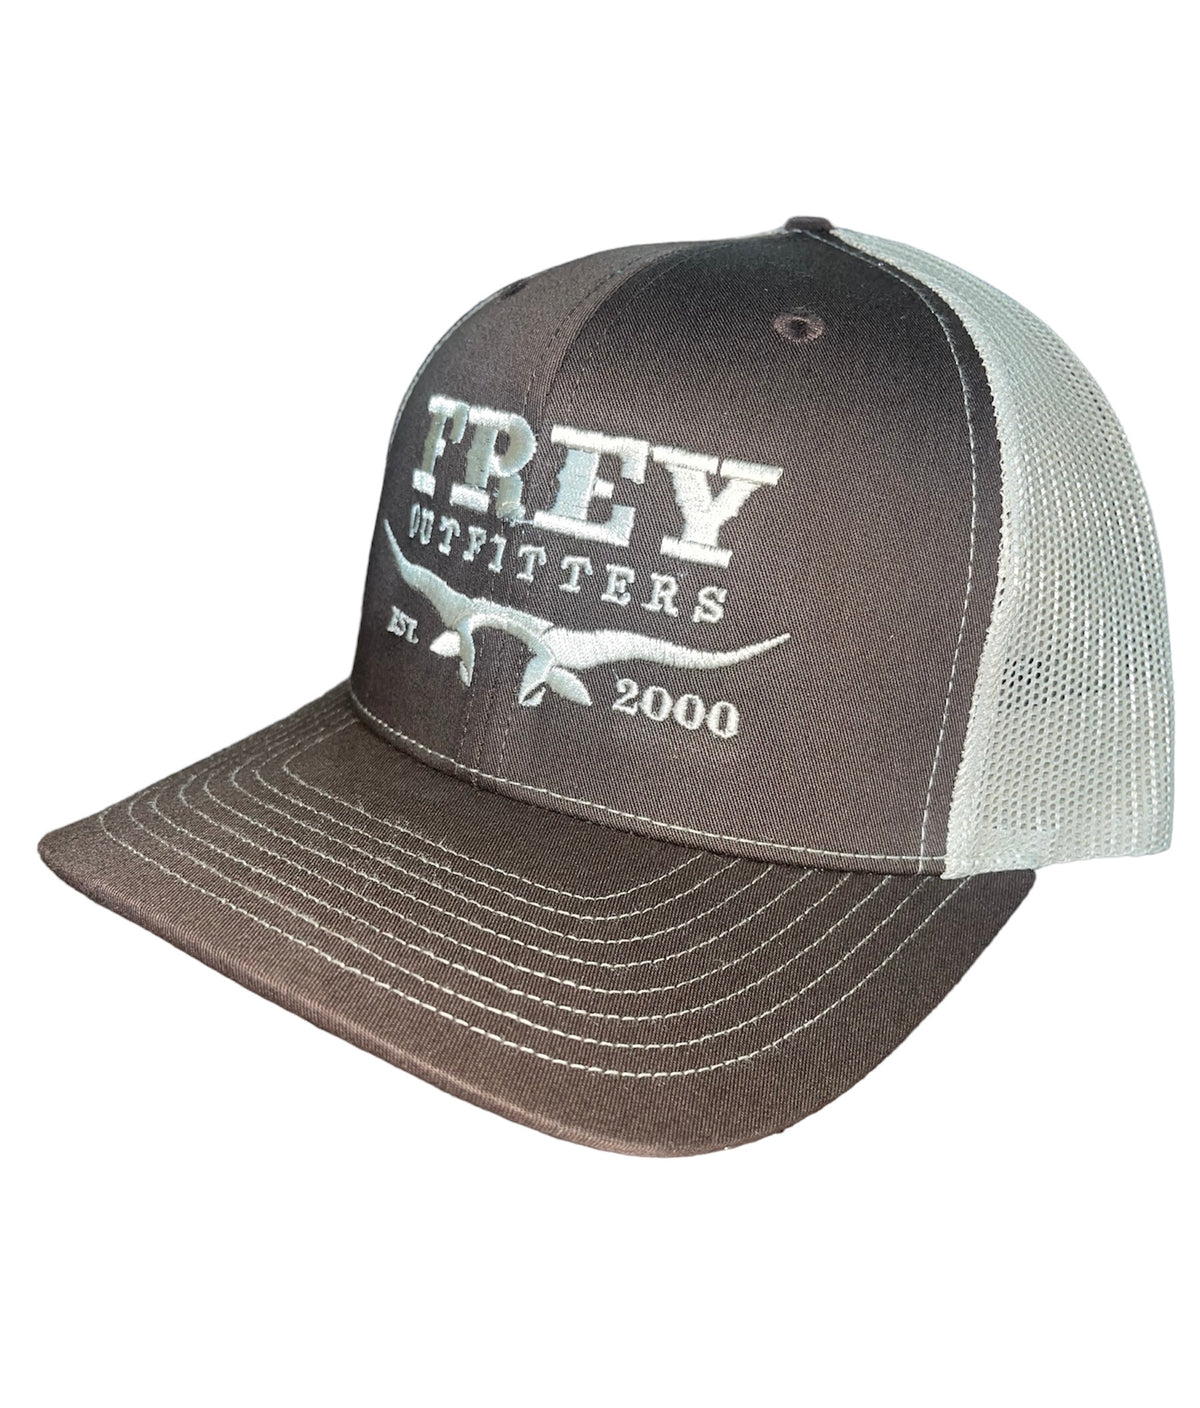 Frey Outfitters Chocolate Chip/Birch Cap